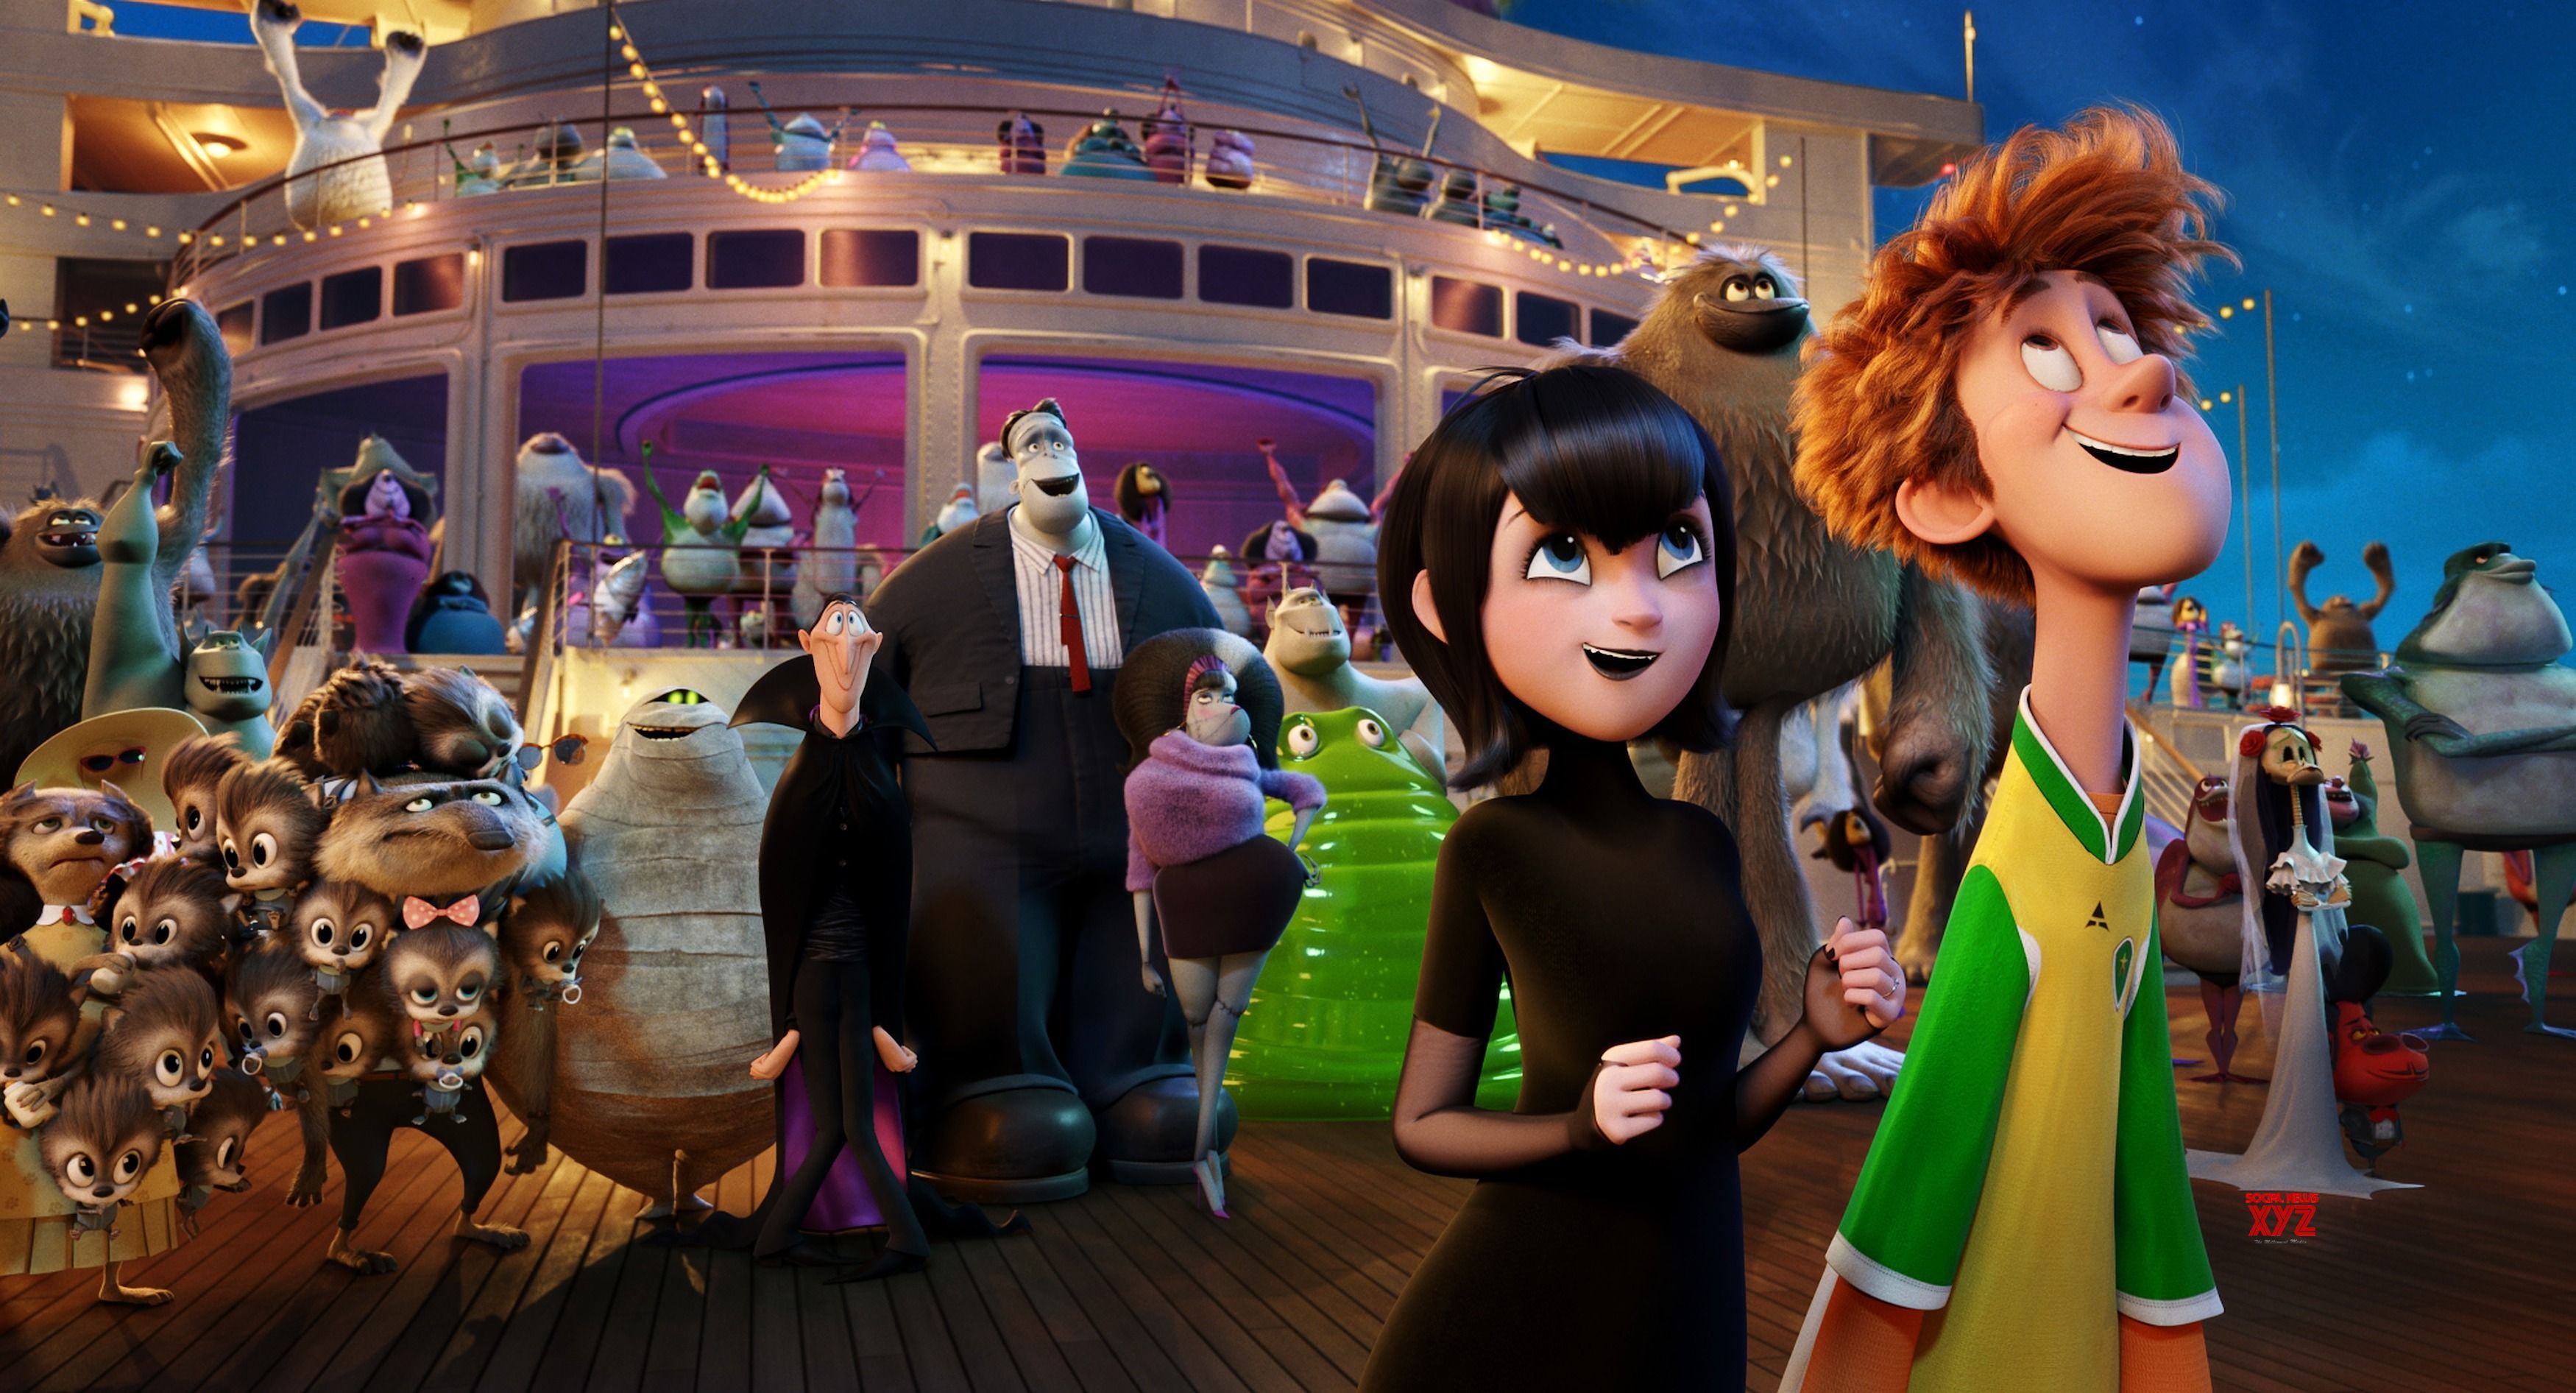 HOTEL TRANSYLVANIA 3 Takes Kids on a Cruise with Monsters #5SecReview ...